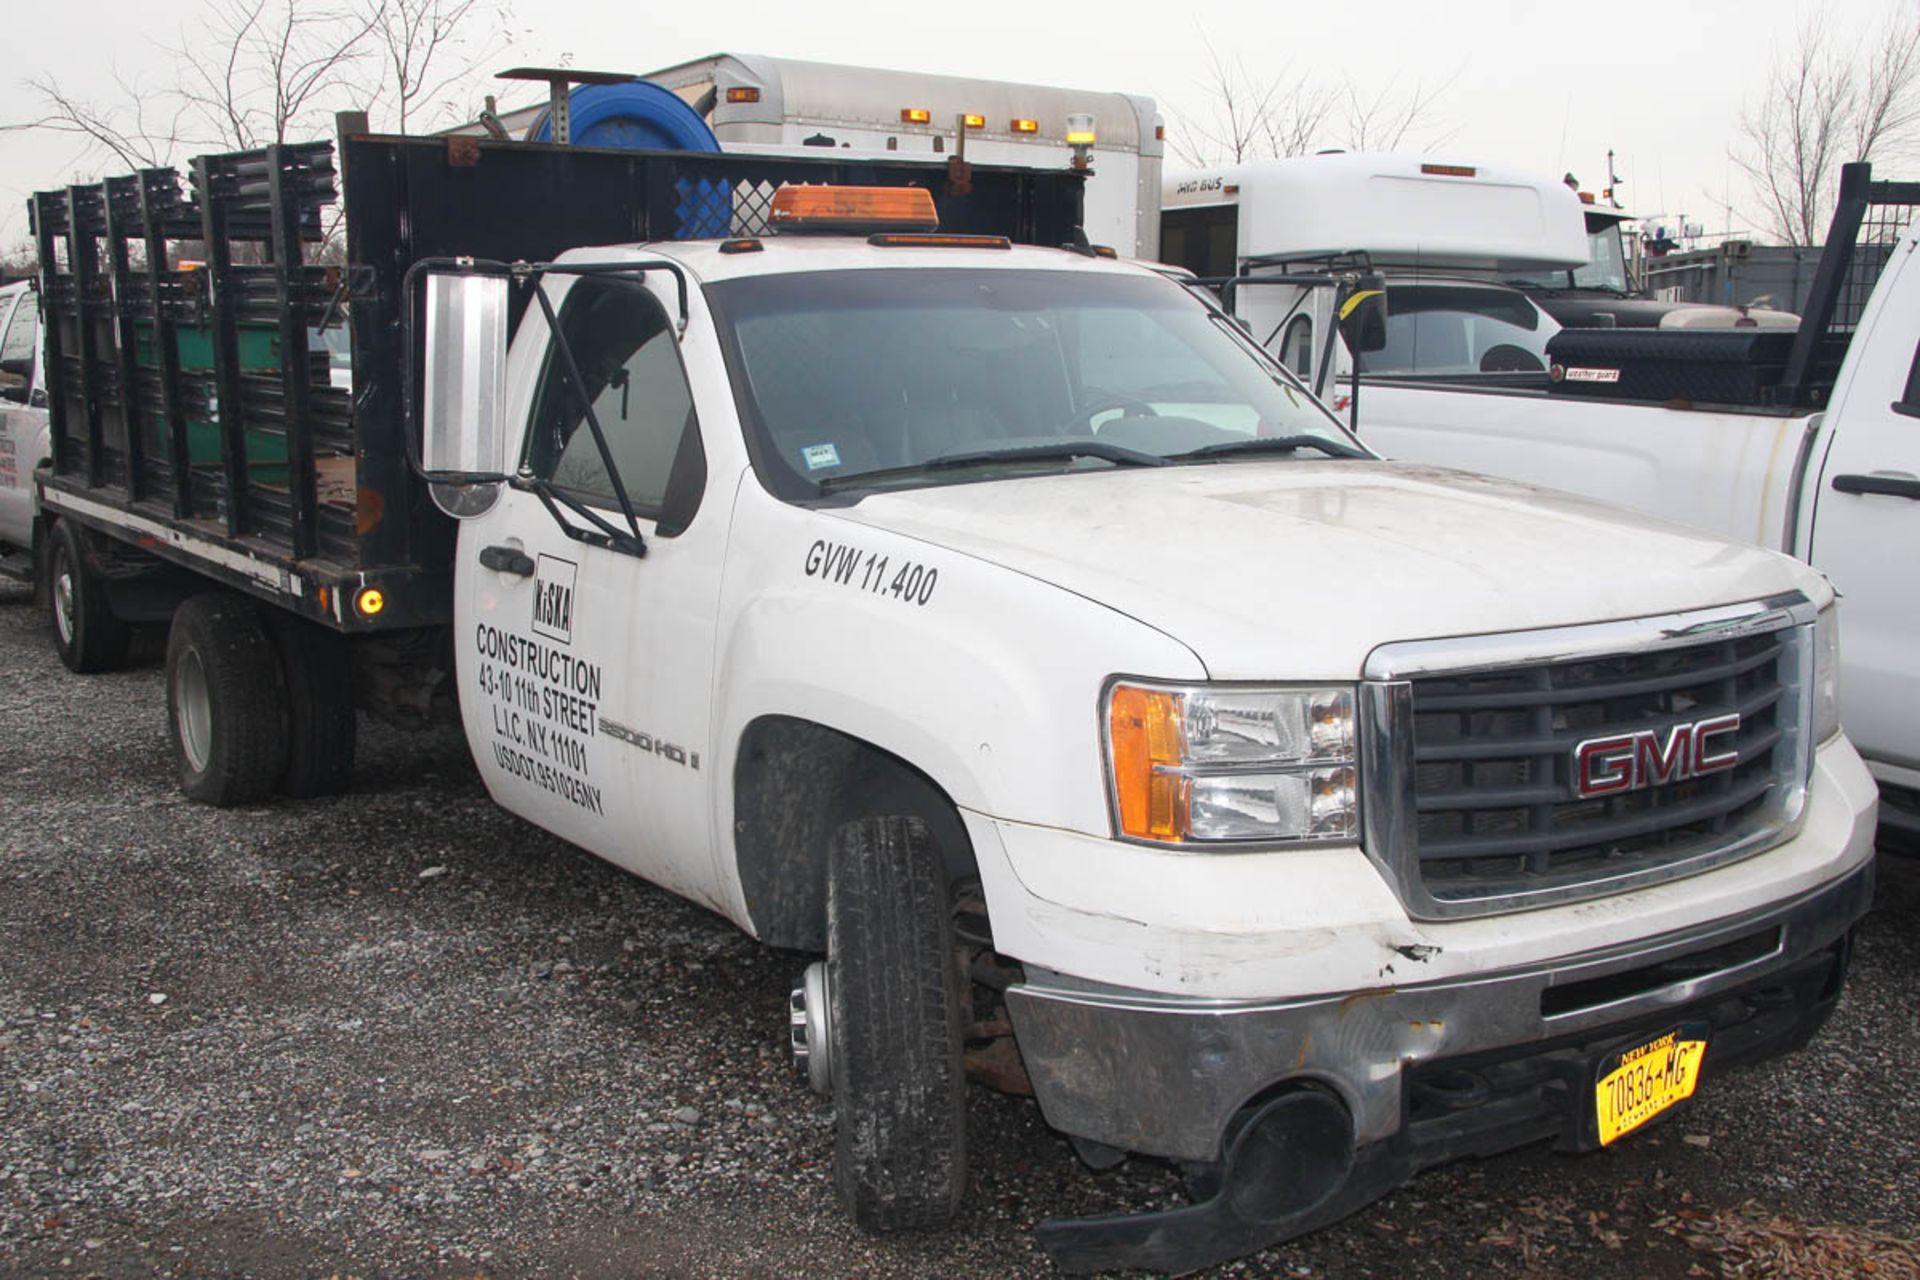 2007 GMC 3500HD 12' STAKE BODY TRUCK, AUTOMATIC, APPROXIMATELY 20,011 MILES, VIN: GDJC34K17E585253 - Image 2 of 19